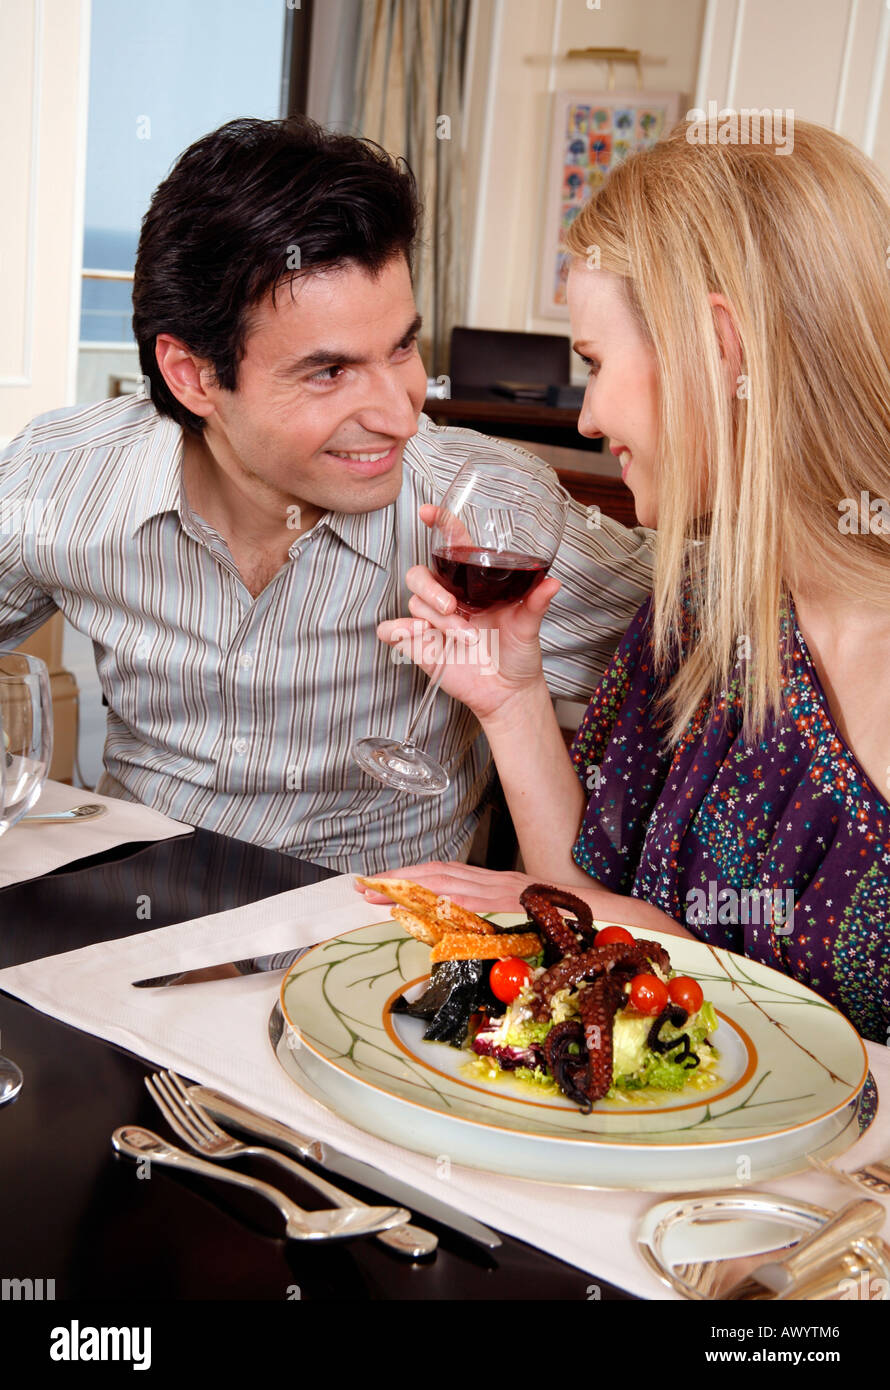 People dining Stock Photo